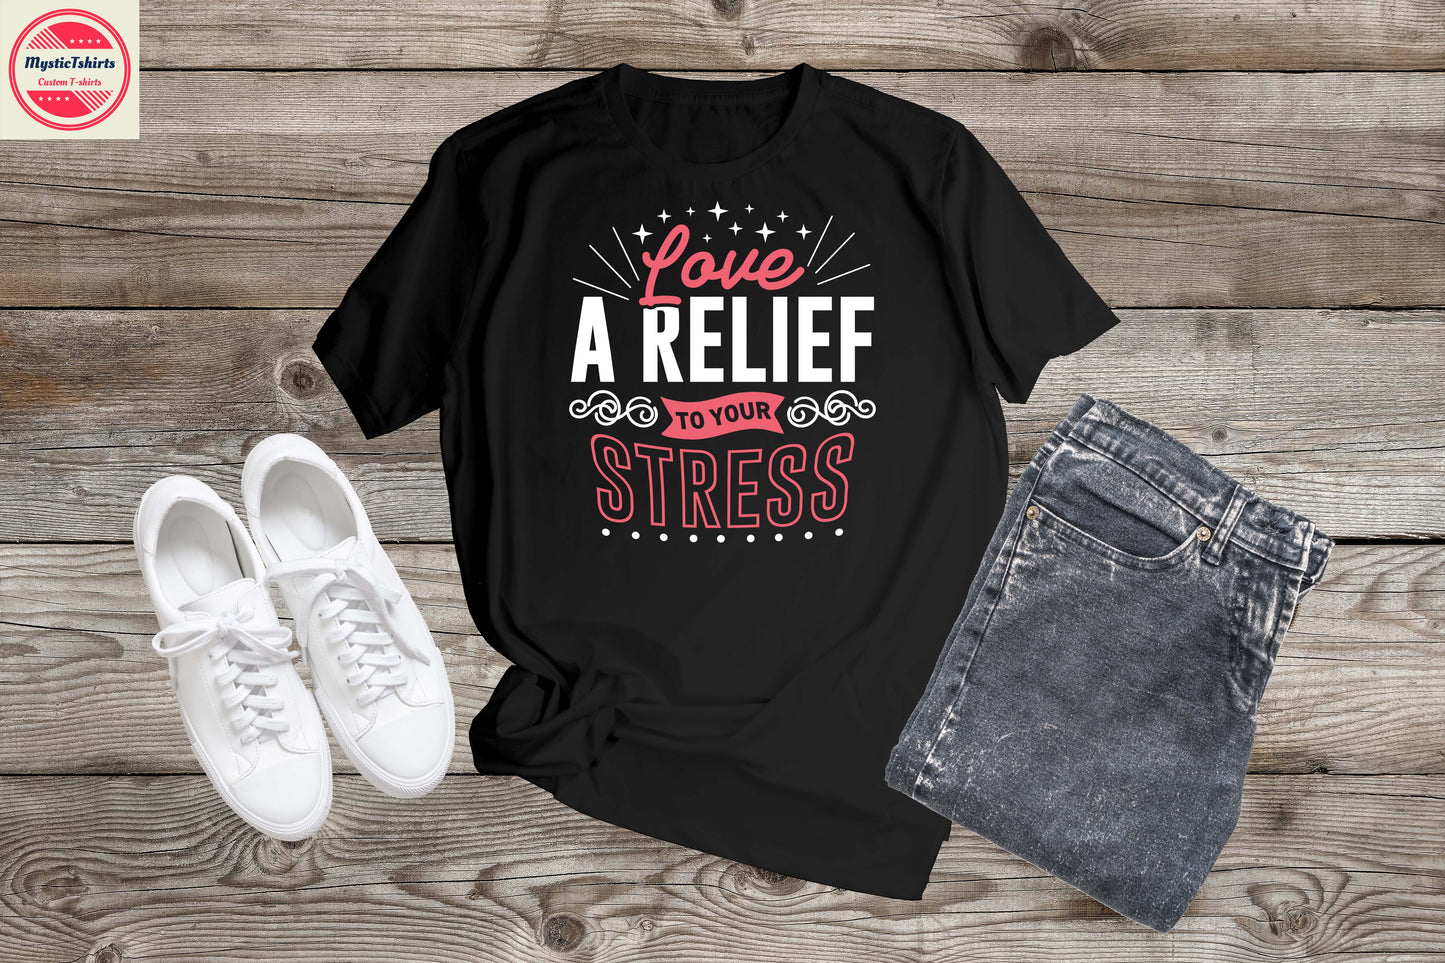 308. LOVE/VALENTINE, LOVE A RELIEF TO YOUR STRESS TO HIM Custom Made Shirt, Personalized T-Shirt, Custom Text, Make Your Own Shirt, Custom Tee